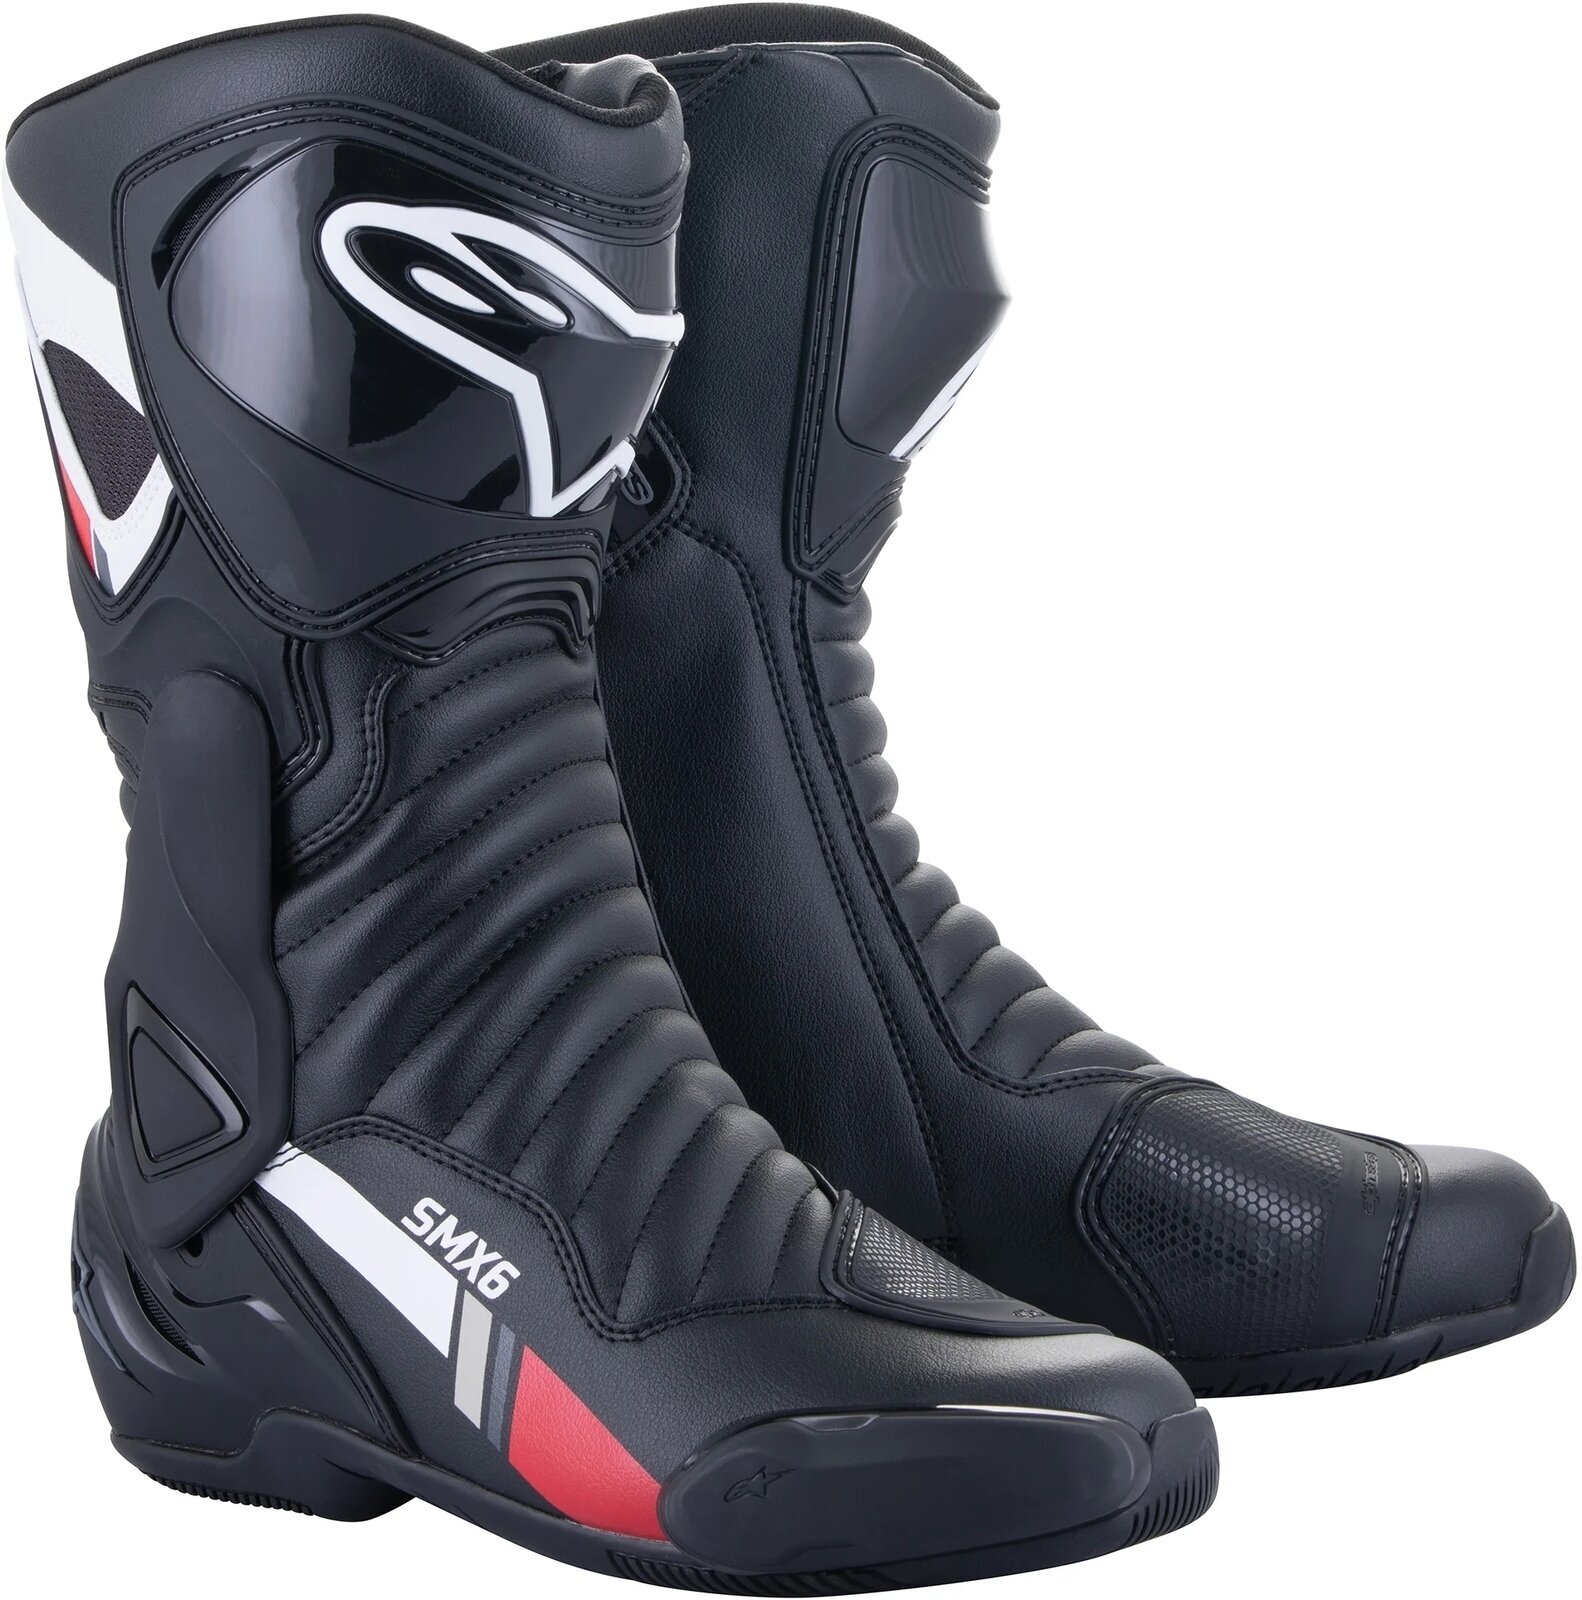 Motorcycle Boots Alpinestars SMX-6 V2 Boots Black/White/Gray 37 Motorcycle Boots